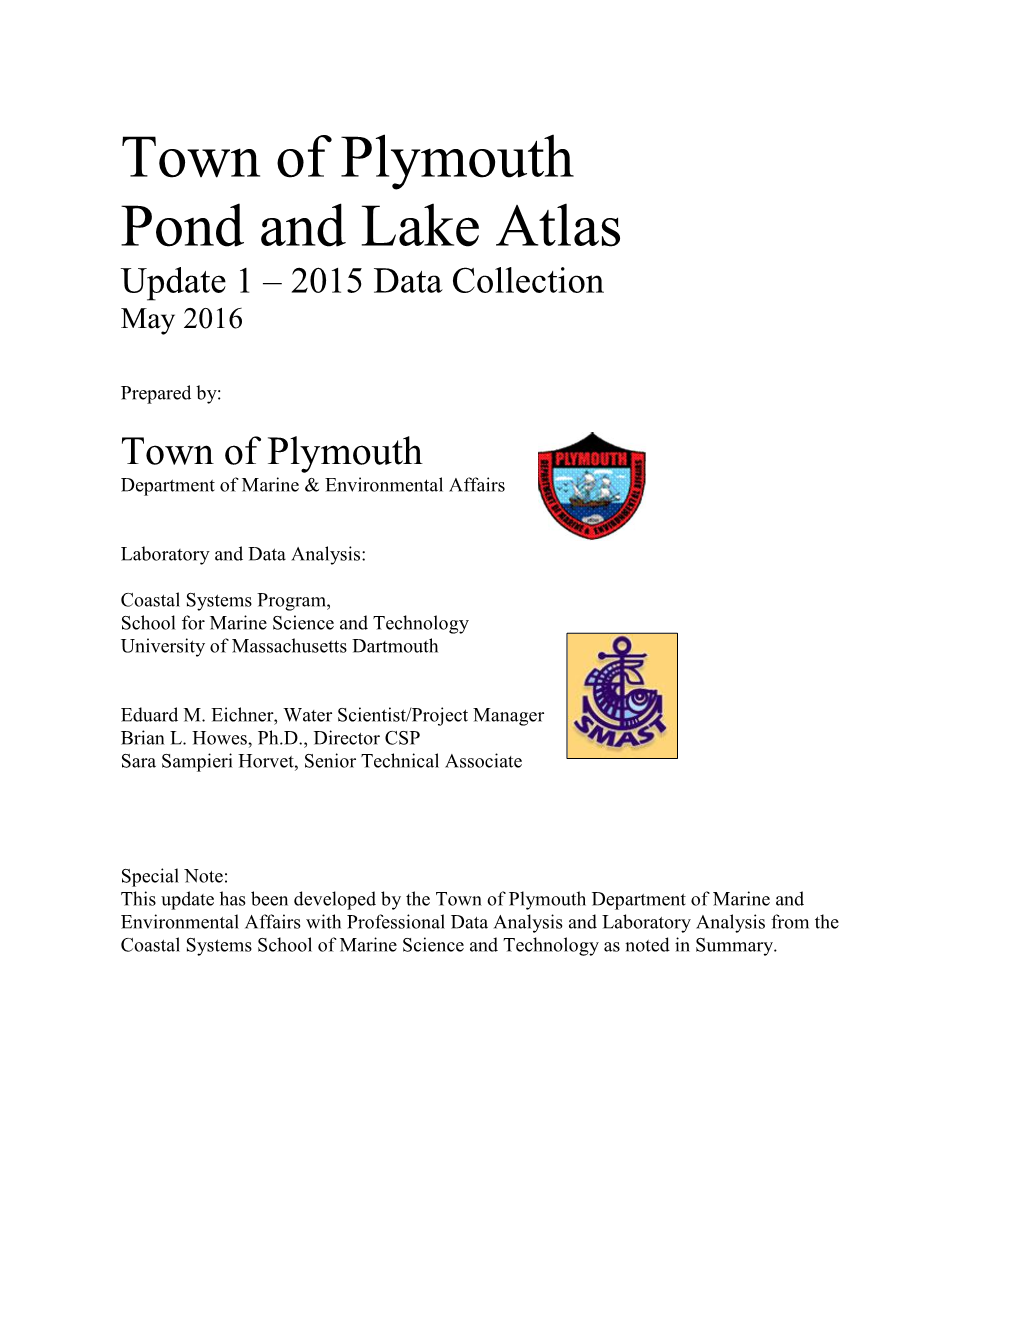 Town of Plymouth Pond and Lake Atlas Update 1 – 2015 Data Collection May 2016